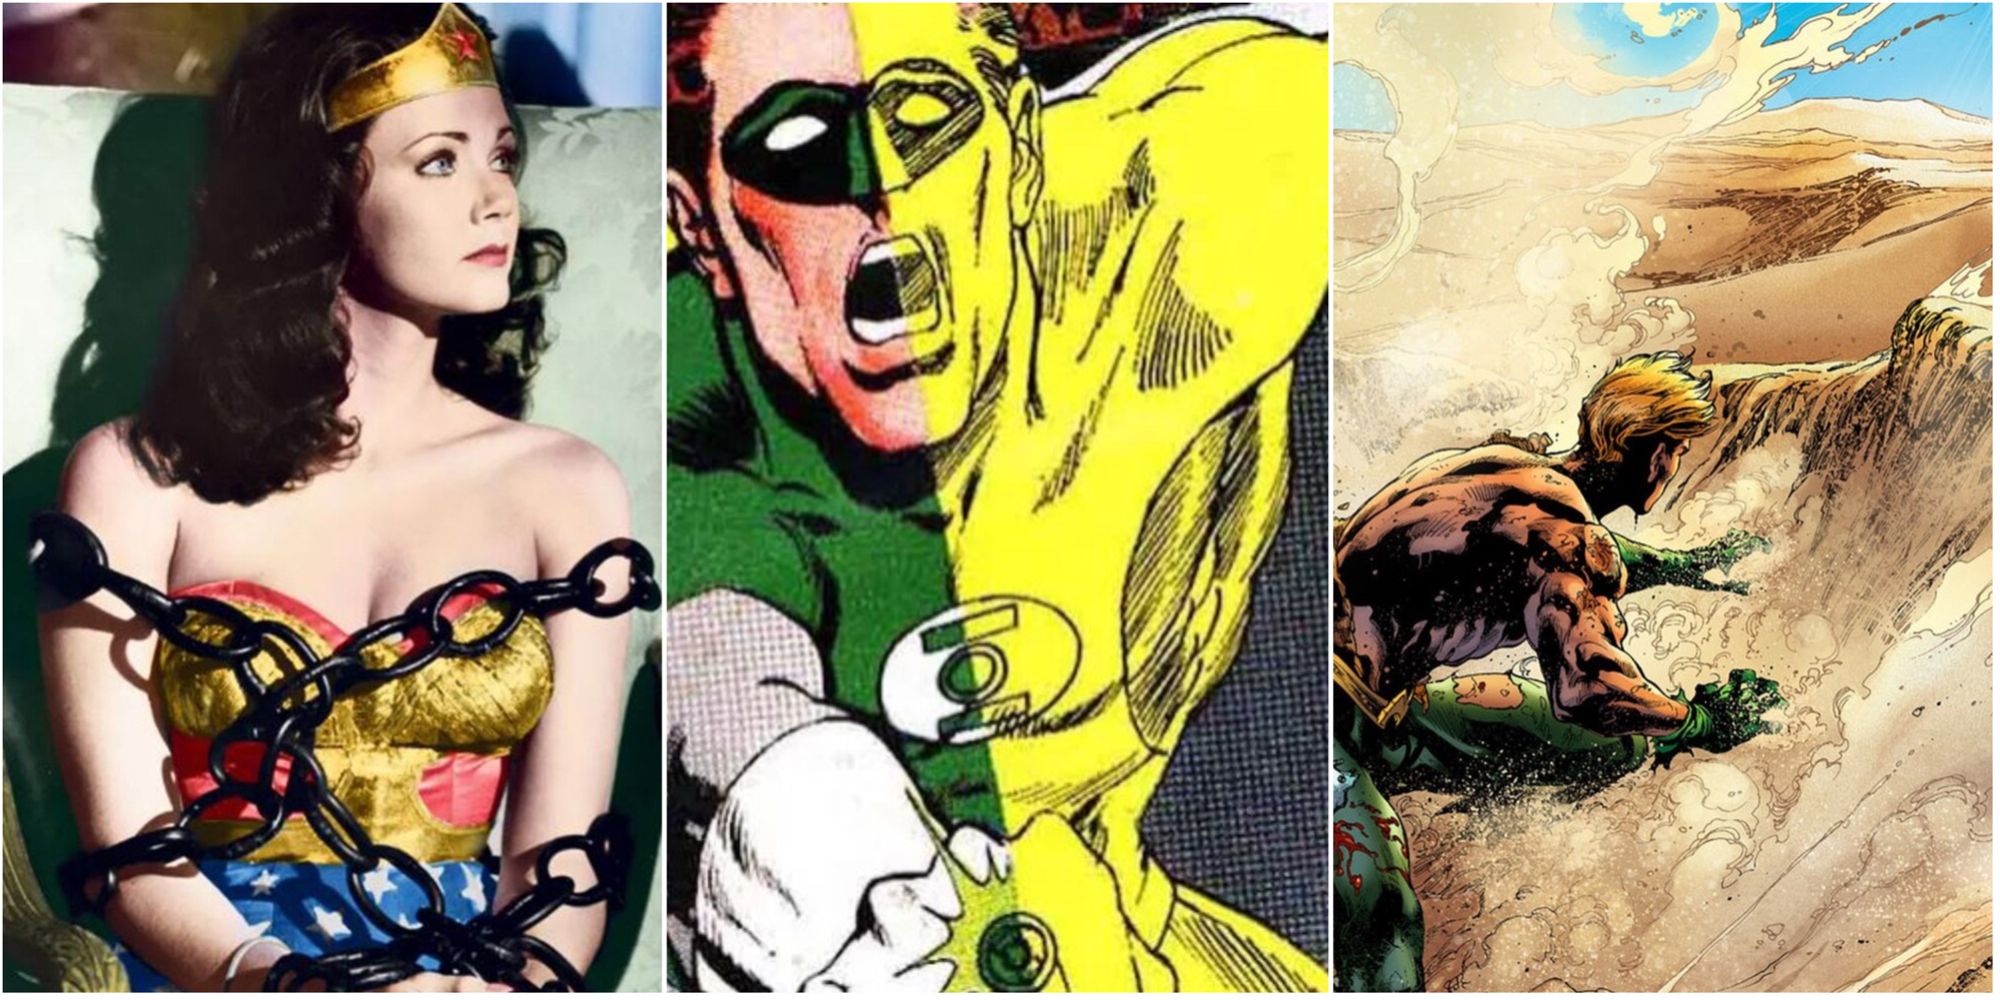 Wonder Woman in bondage, Green Lantern overcome by yellow, and Aquaman in the desert with no water